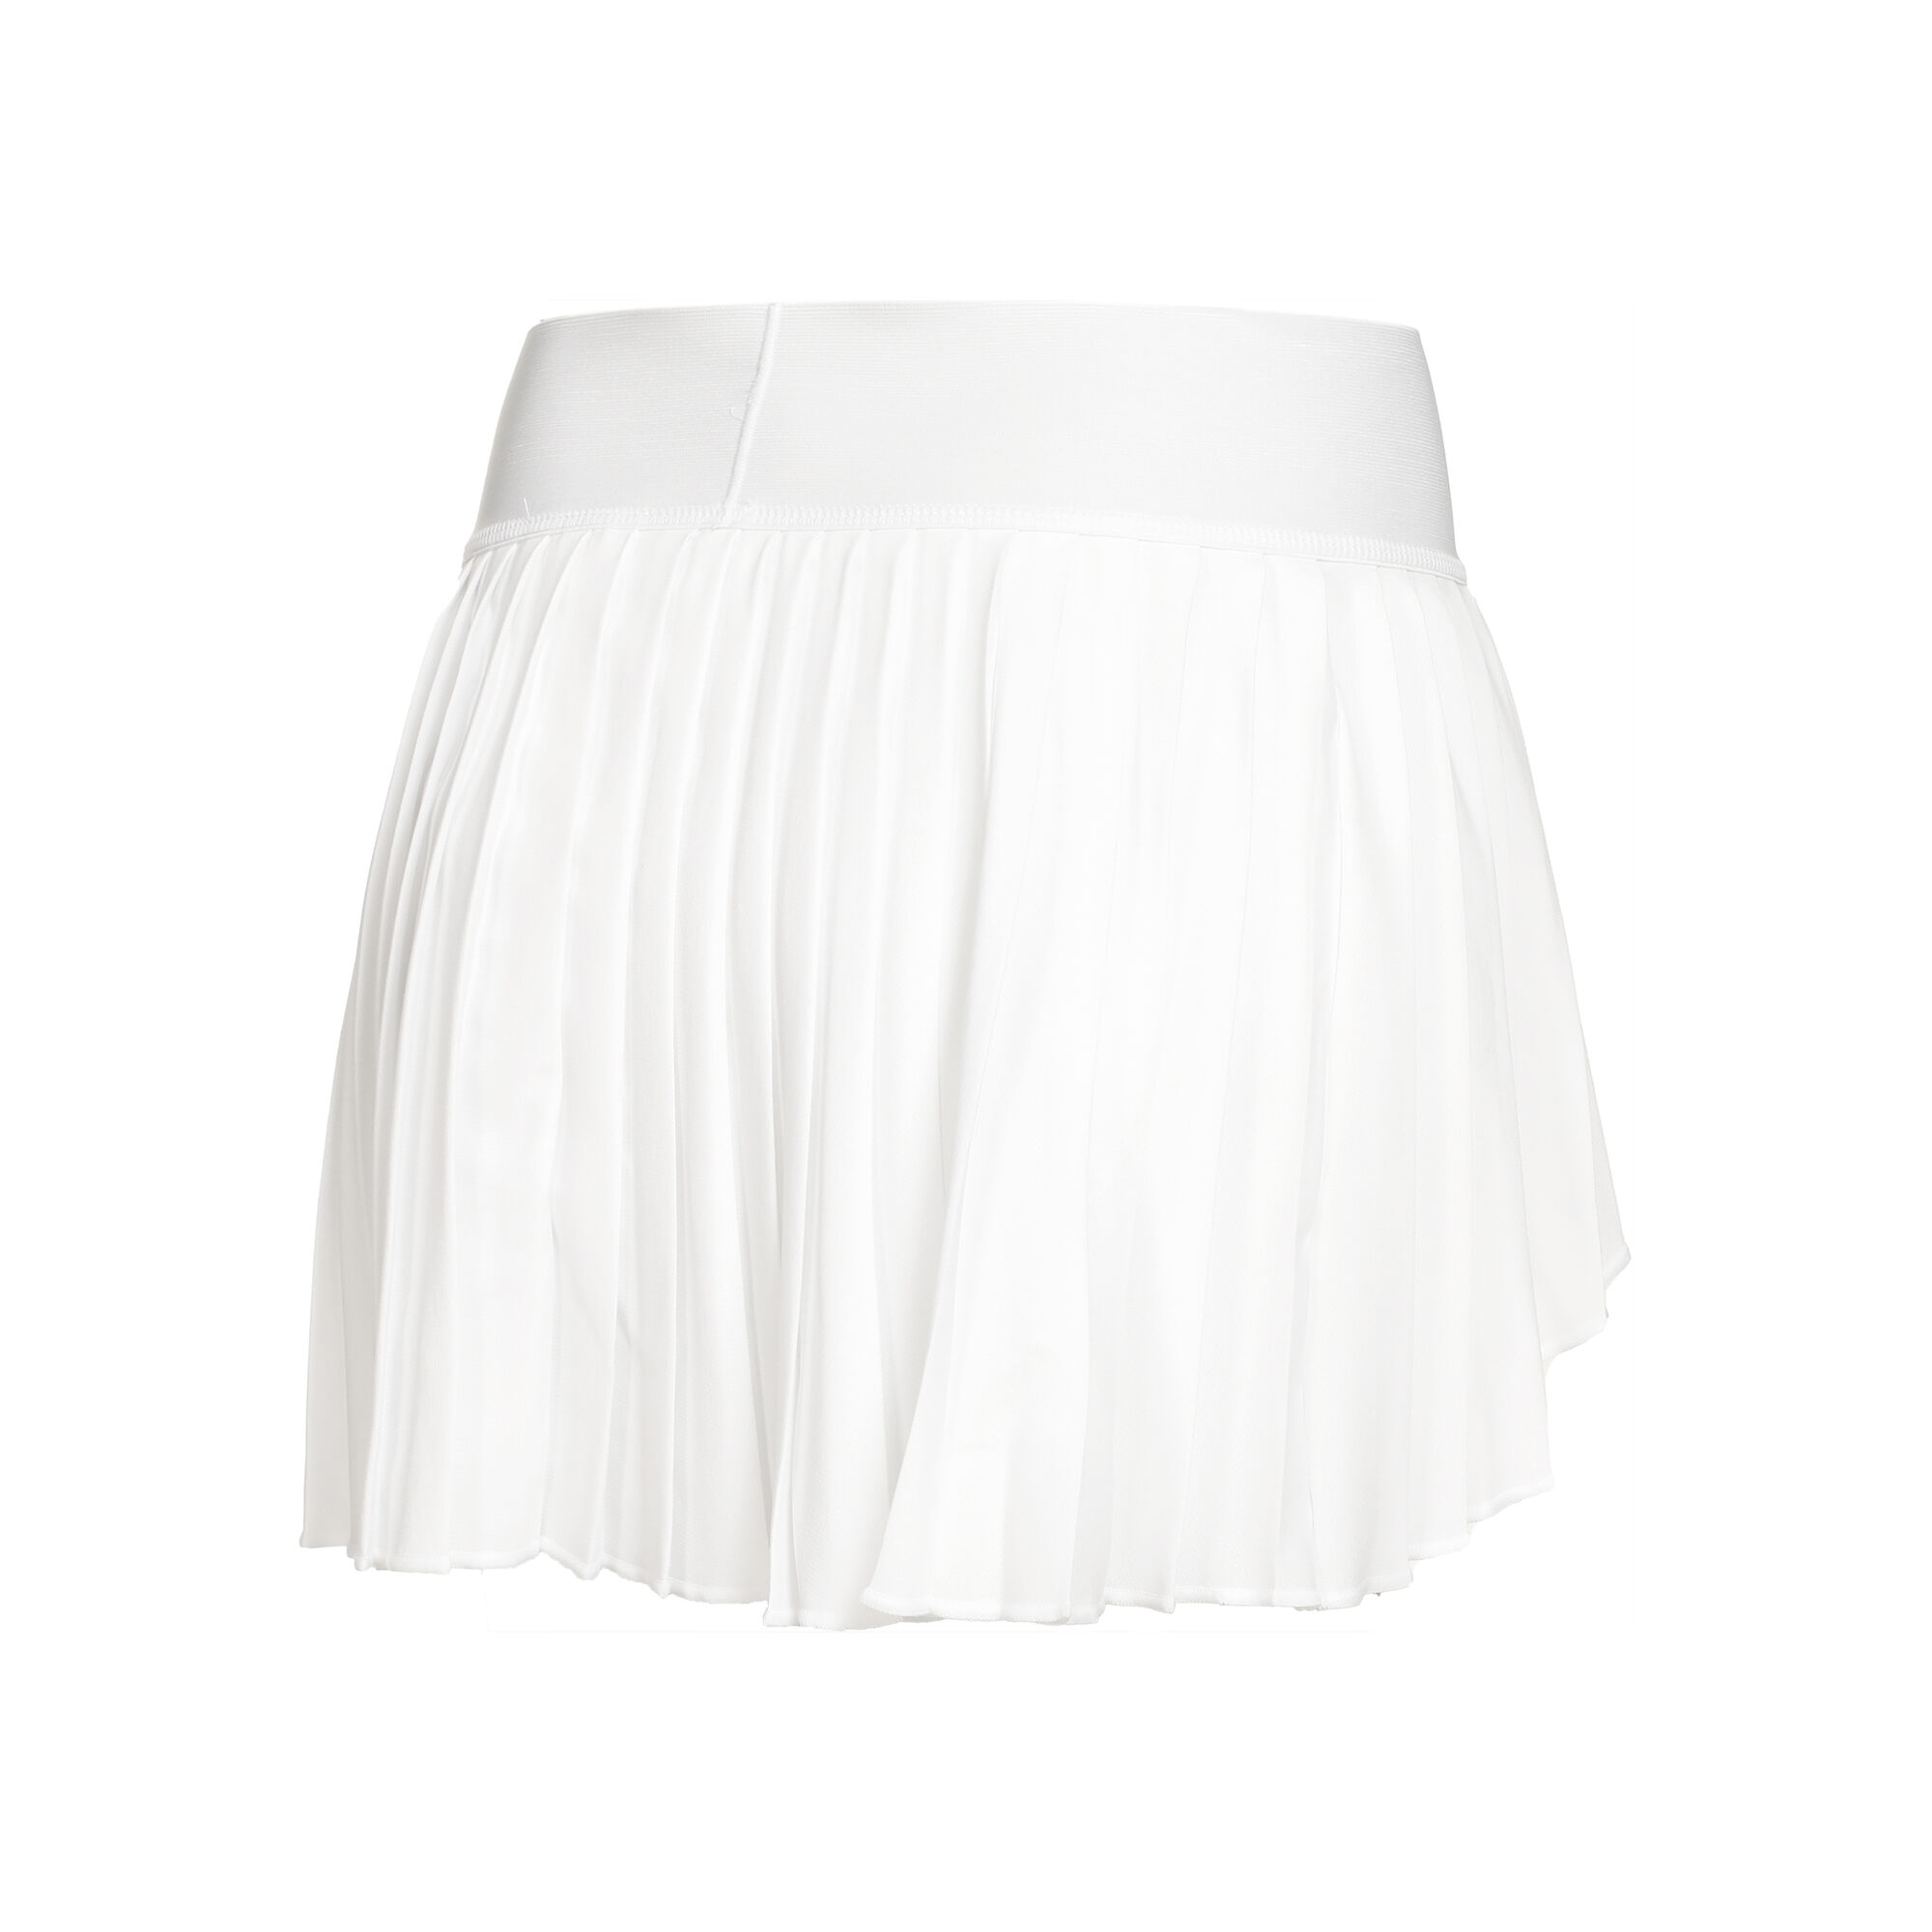 Trending: Take the Court with Pleated Skirts As Seen on